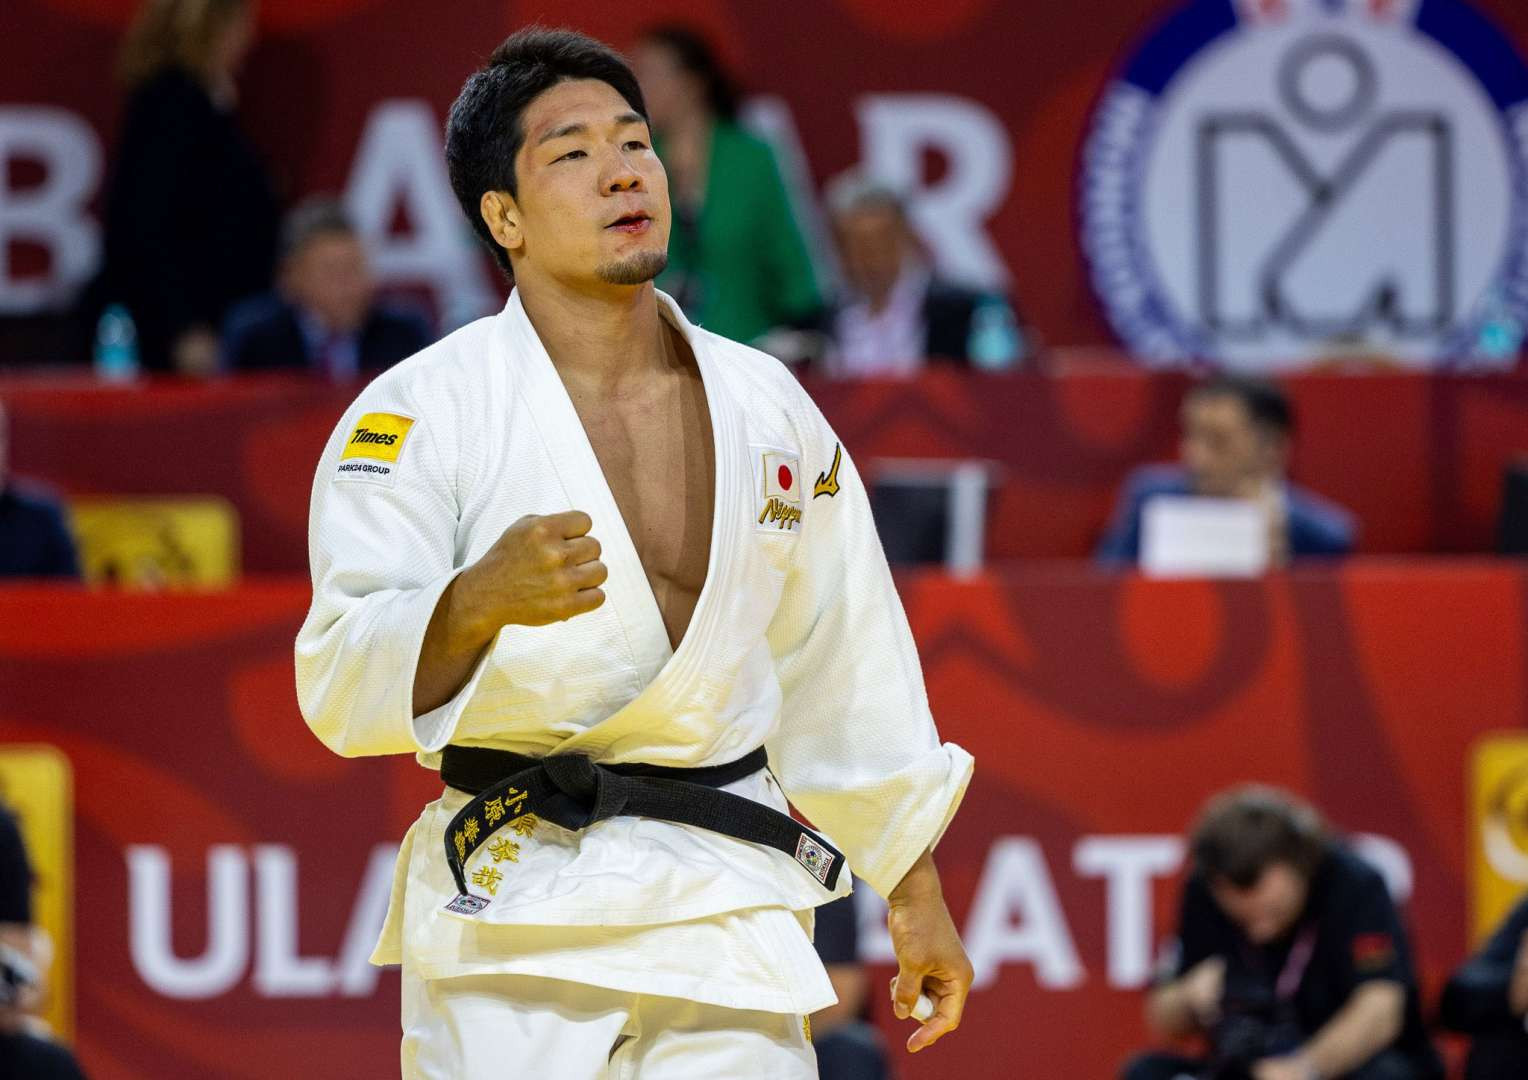 Japan add four gold medals on second day at IJF Grand Slam in Ulaanbaatar